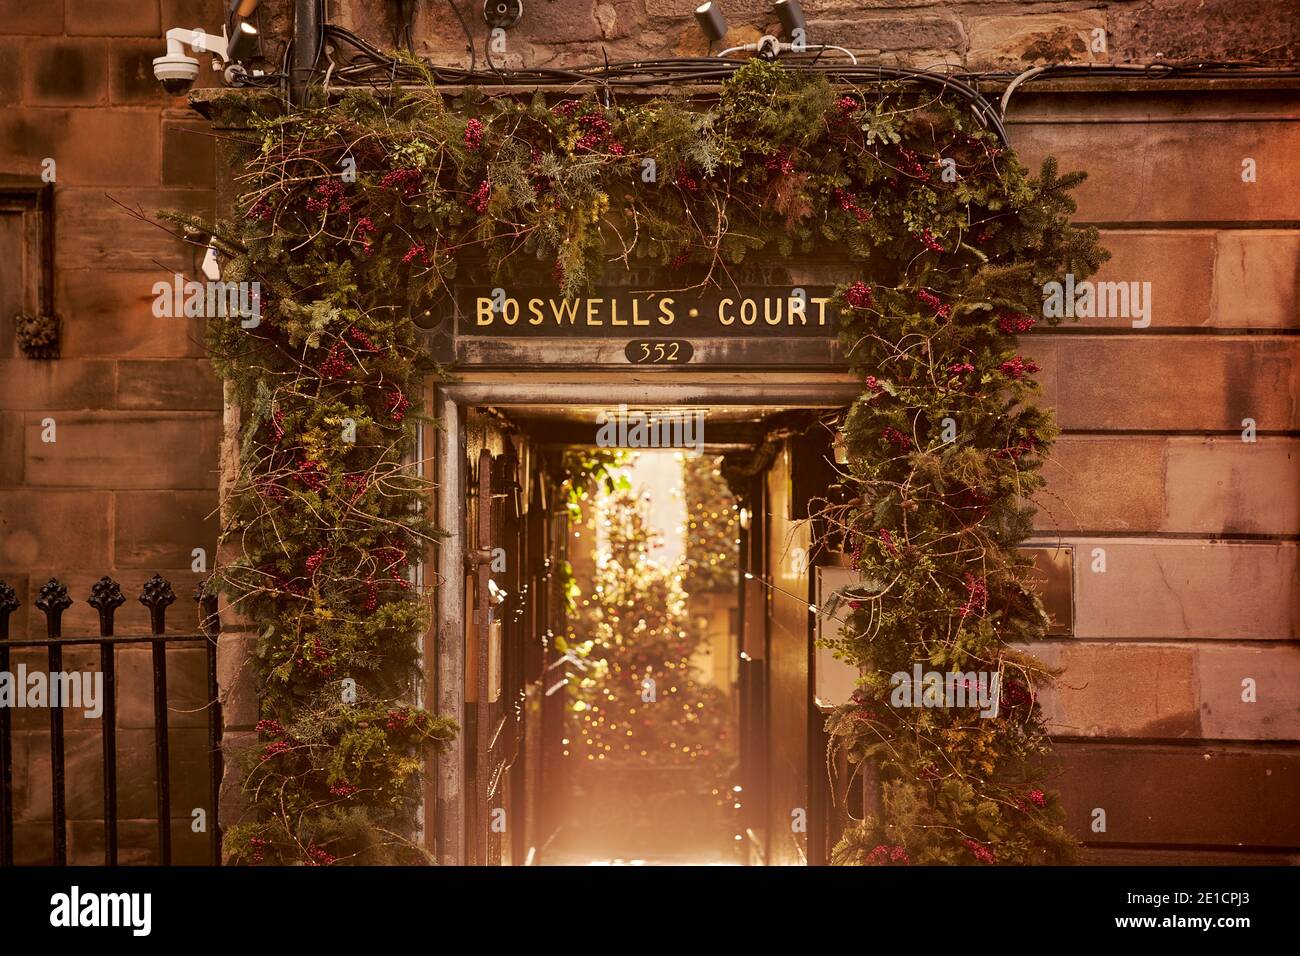 BOSWELL'S COURT, the entrance to The Witchery Restaurant, along the royal mile in Edinburgh, lit up at Christmas time. Stock Photo